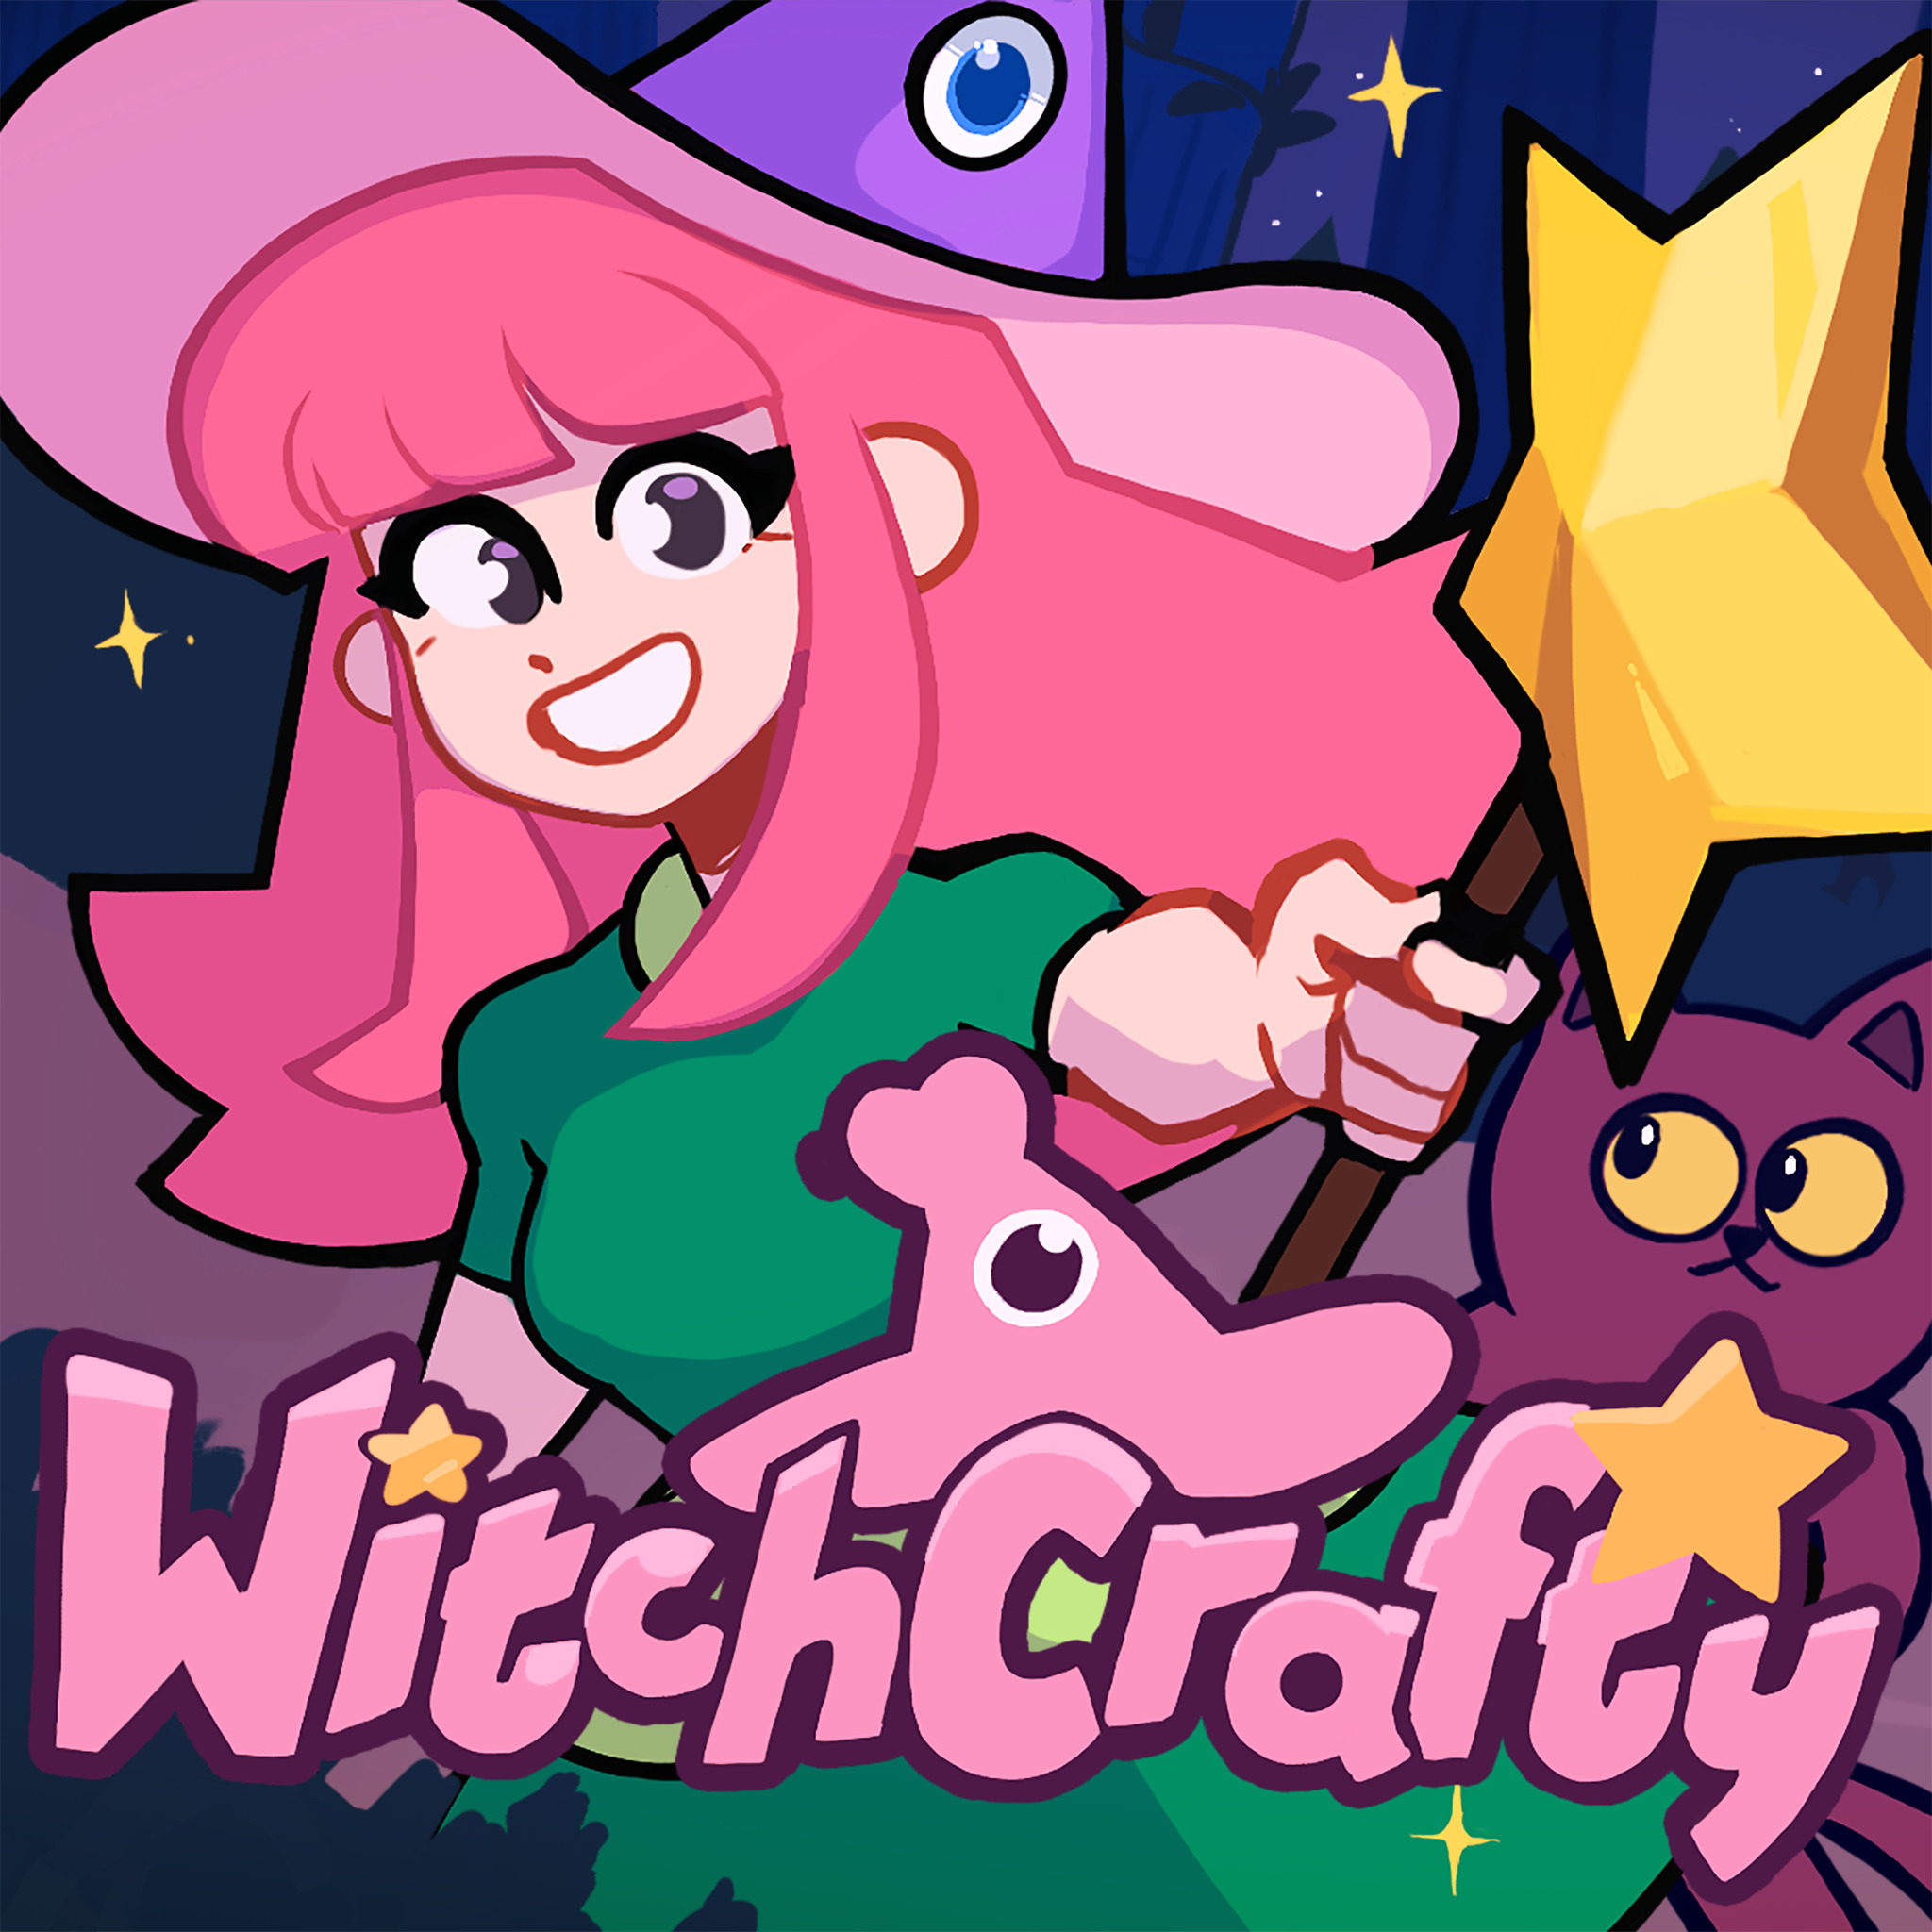 The Knight Witch - Metacritic